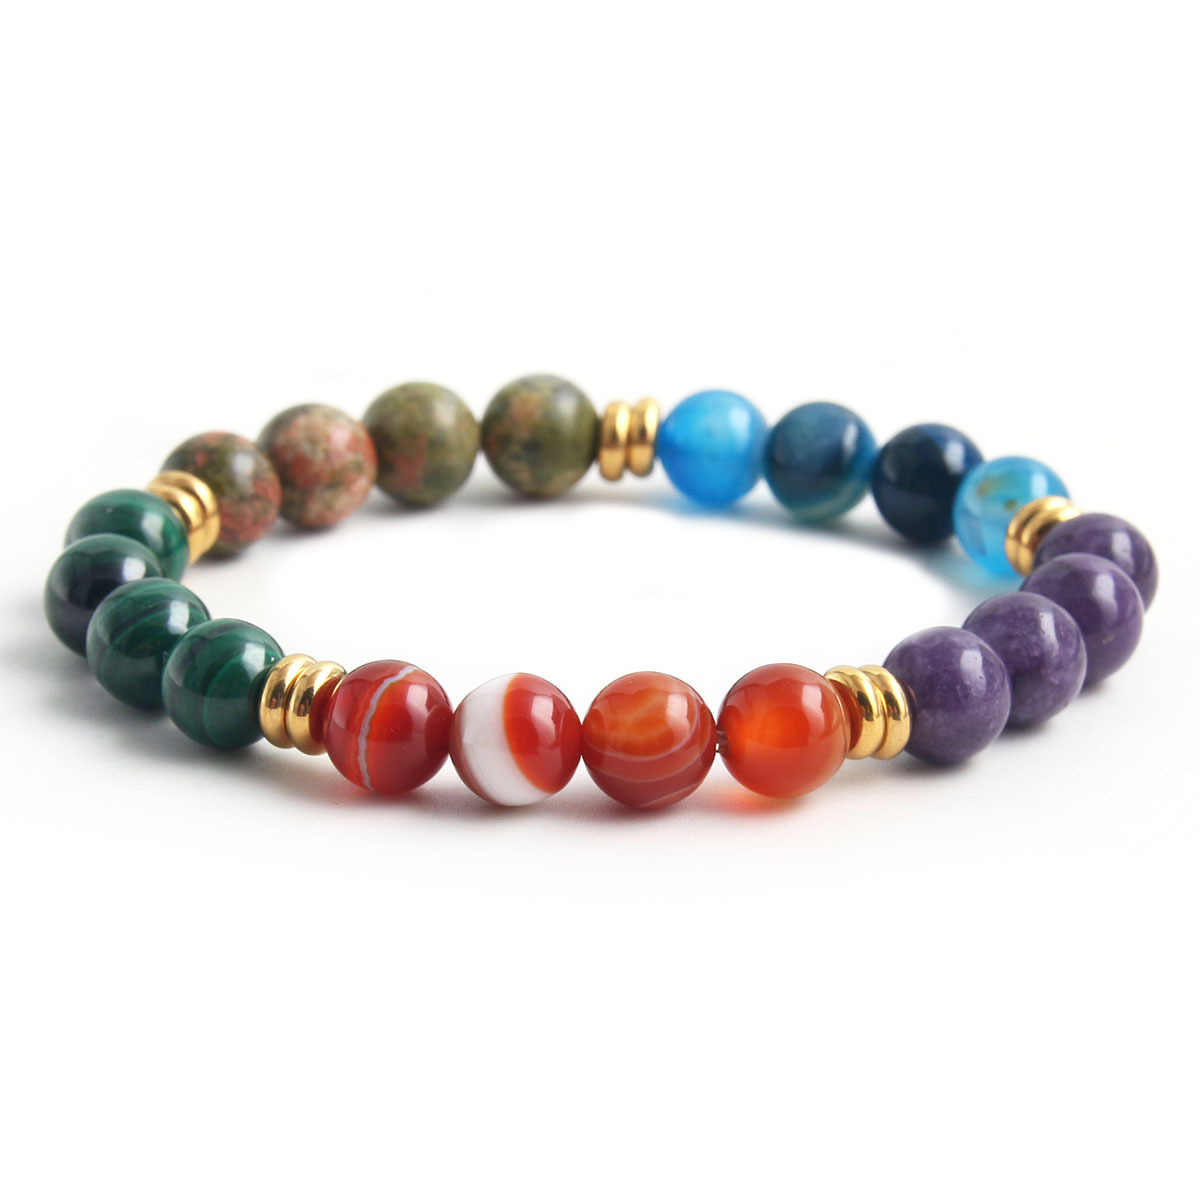 2:Red striped agate and amethyst and blue striped agate and flower green and malachite